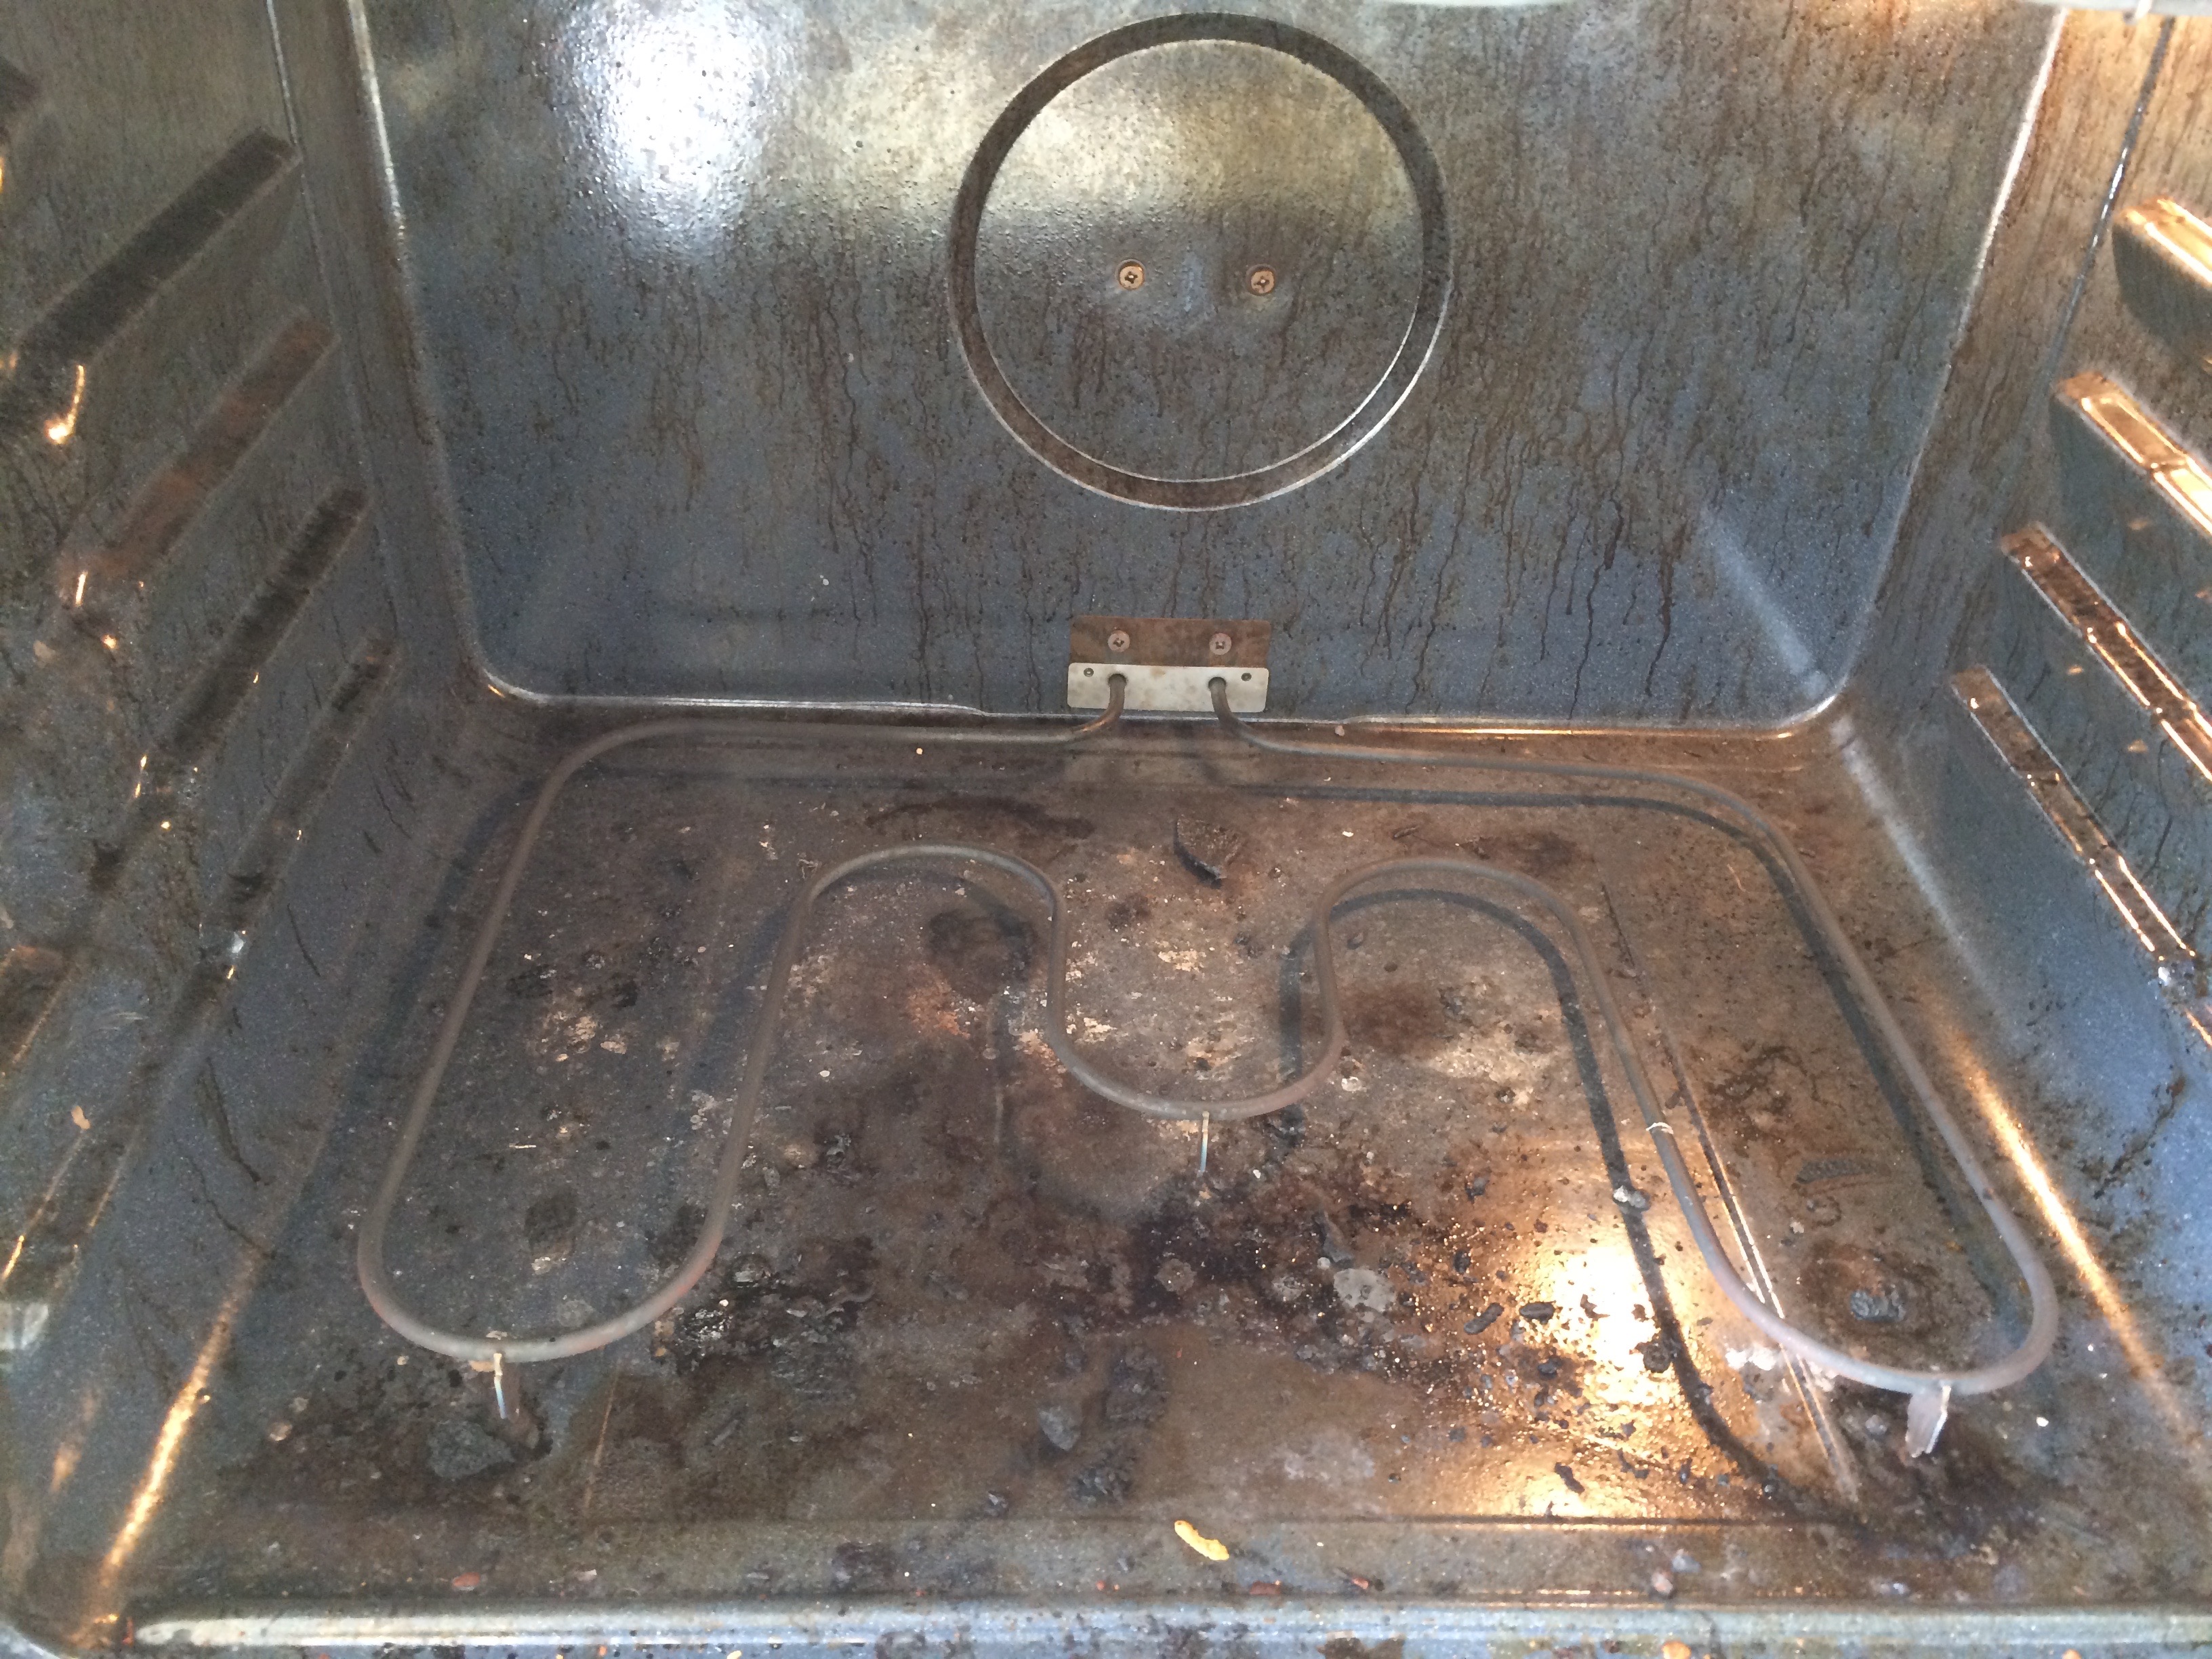 Another Dirty oven